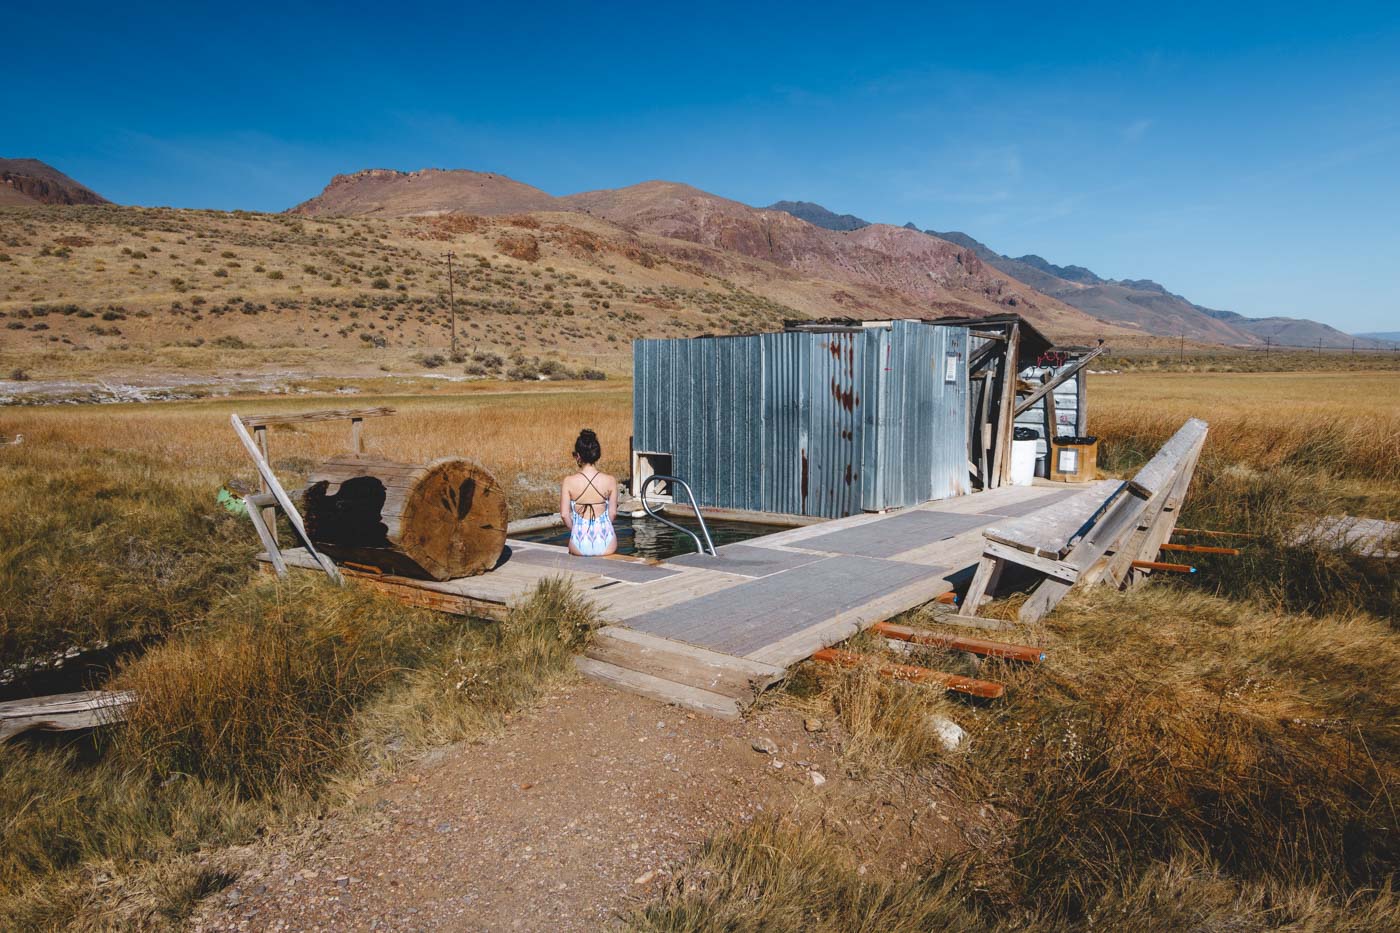 Nina in a bathing suit sitting on the edge of Alvord Hot Springs besides a metal shack with a view of mountains.